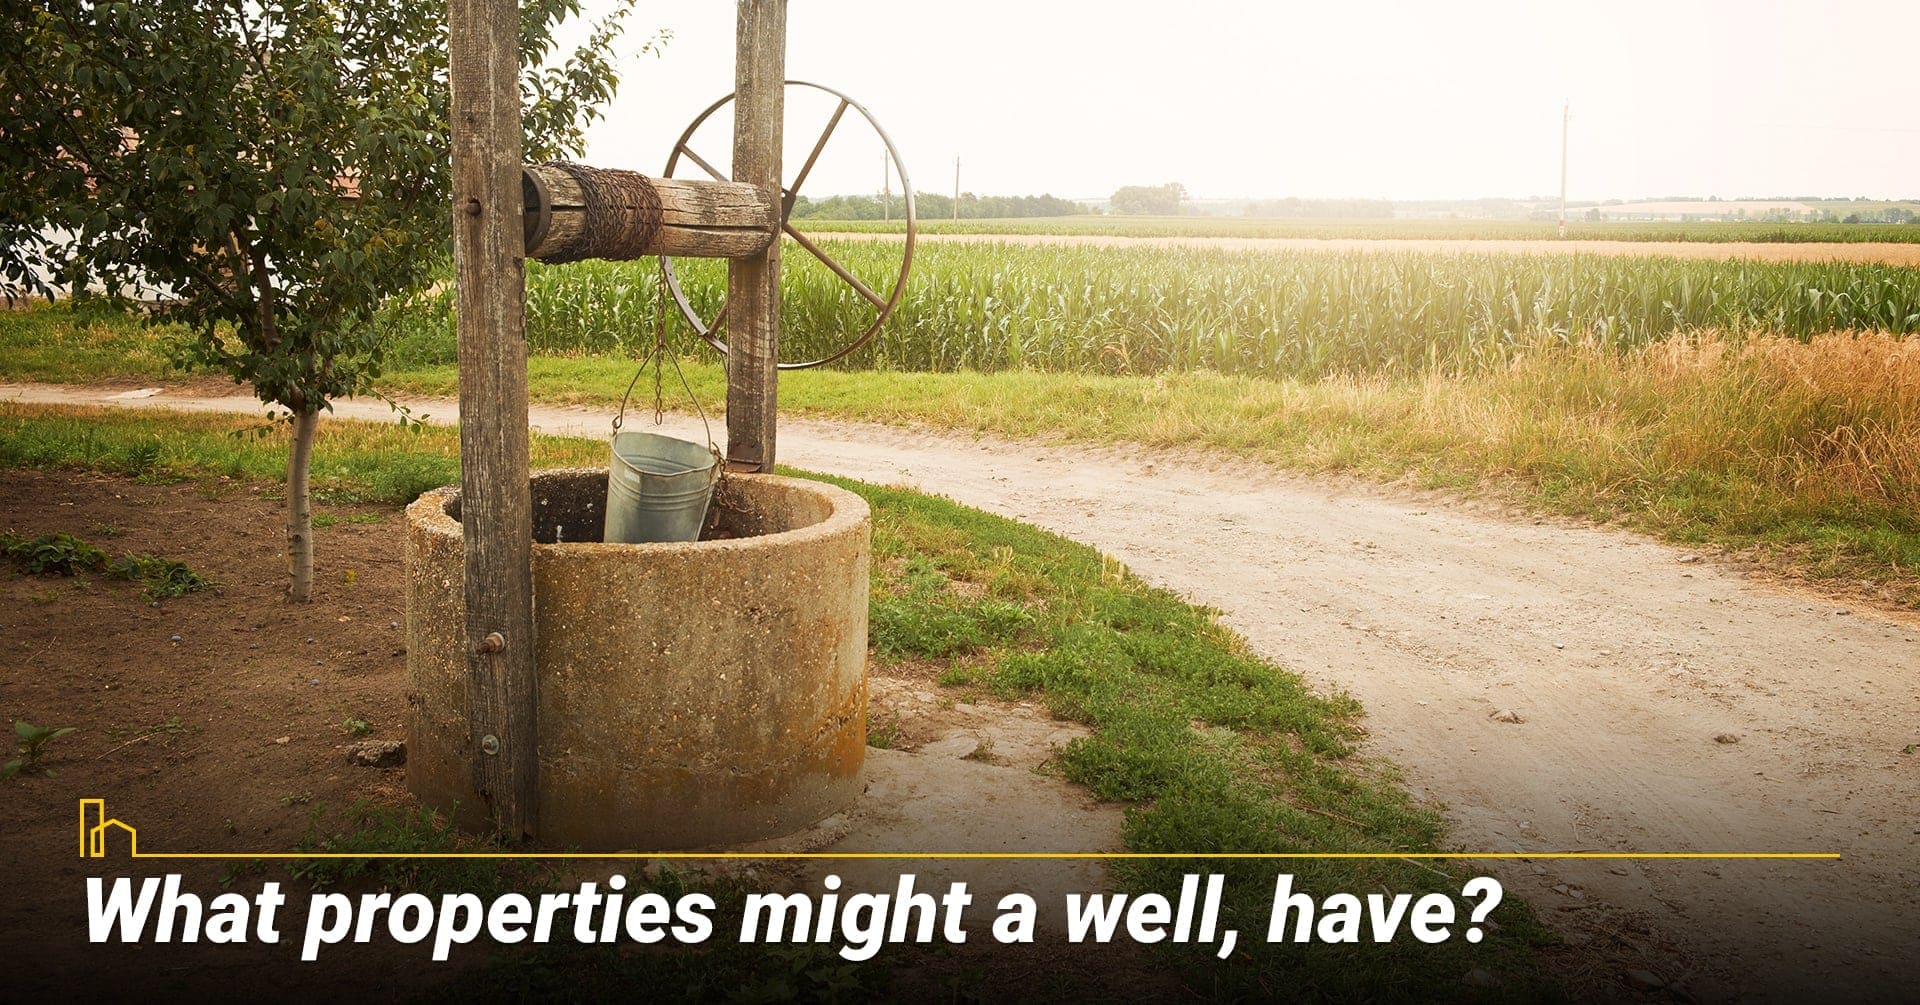 What properties might a well, have? Wells are typically located in rural areas